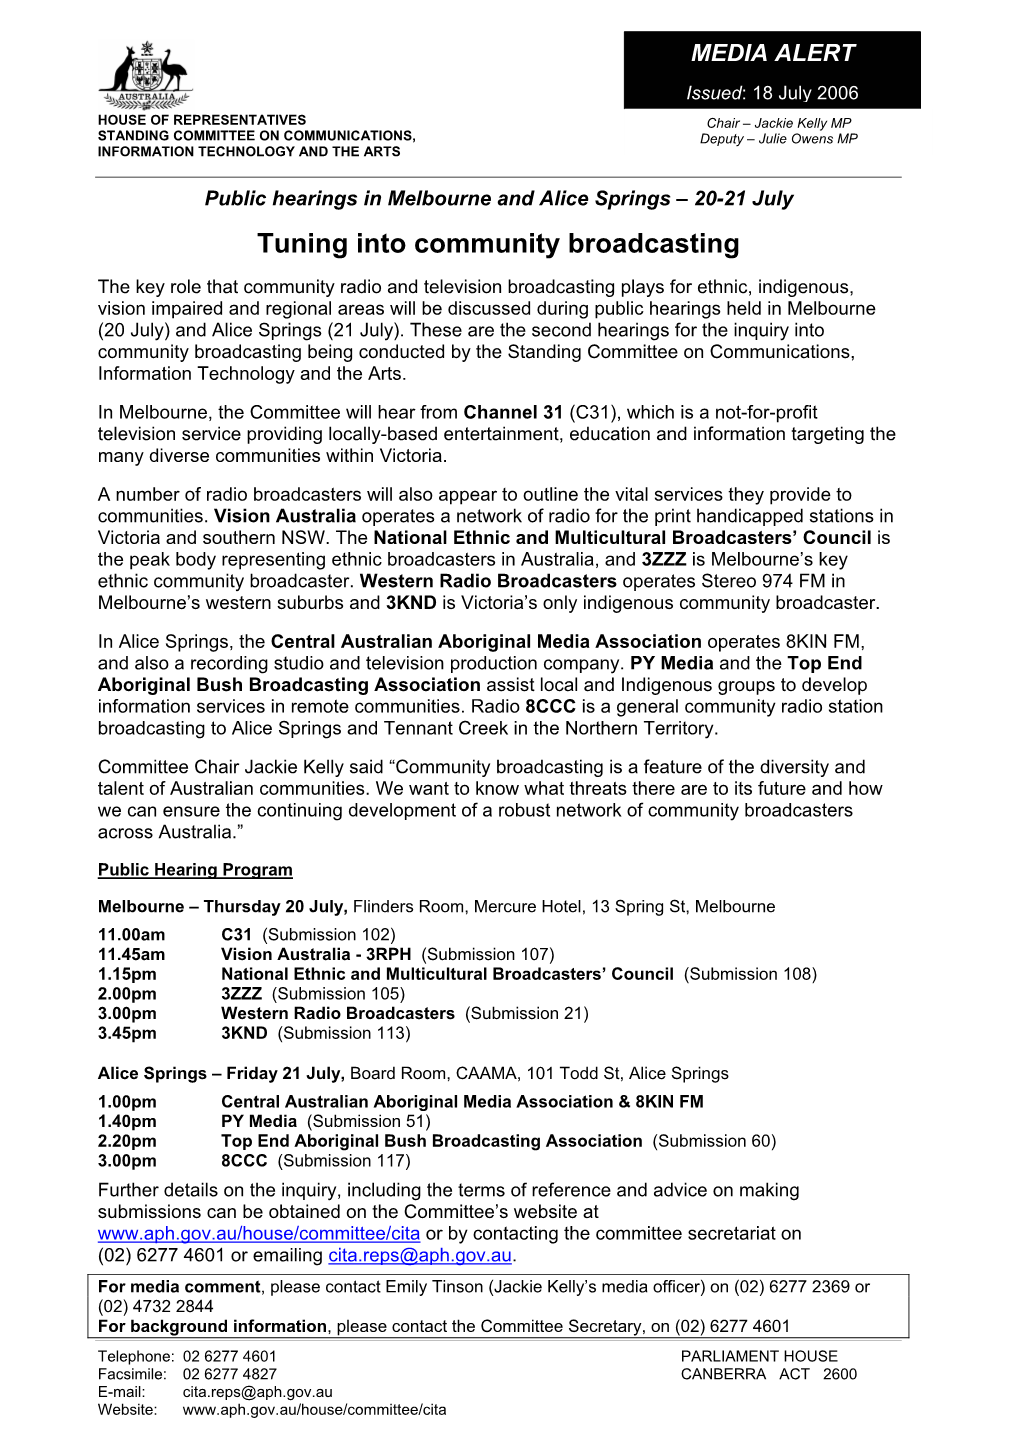 Public Hearings in Melbourne and Alice Springs – 20-21 July Tuning Into Community Broadcasting